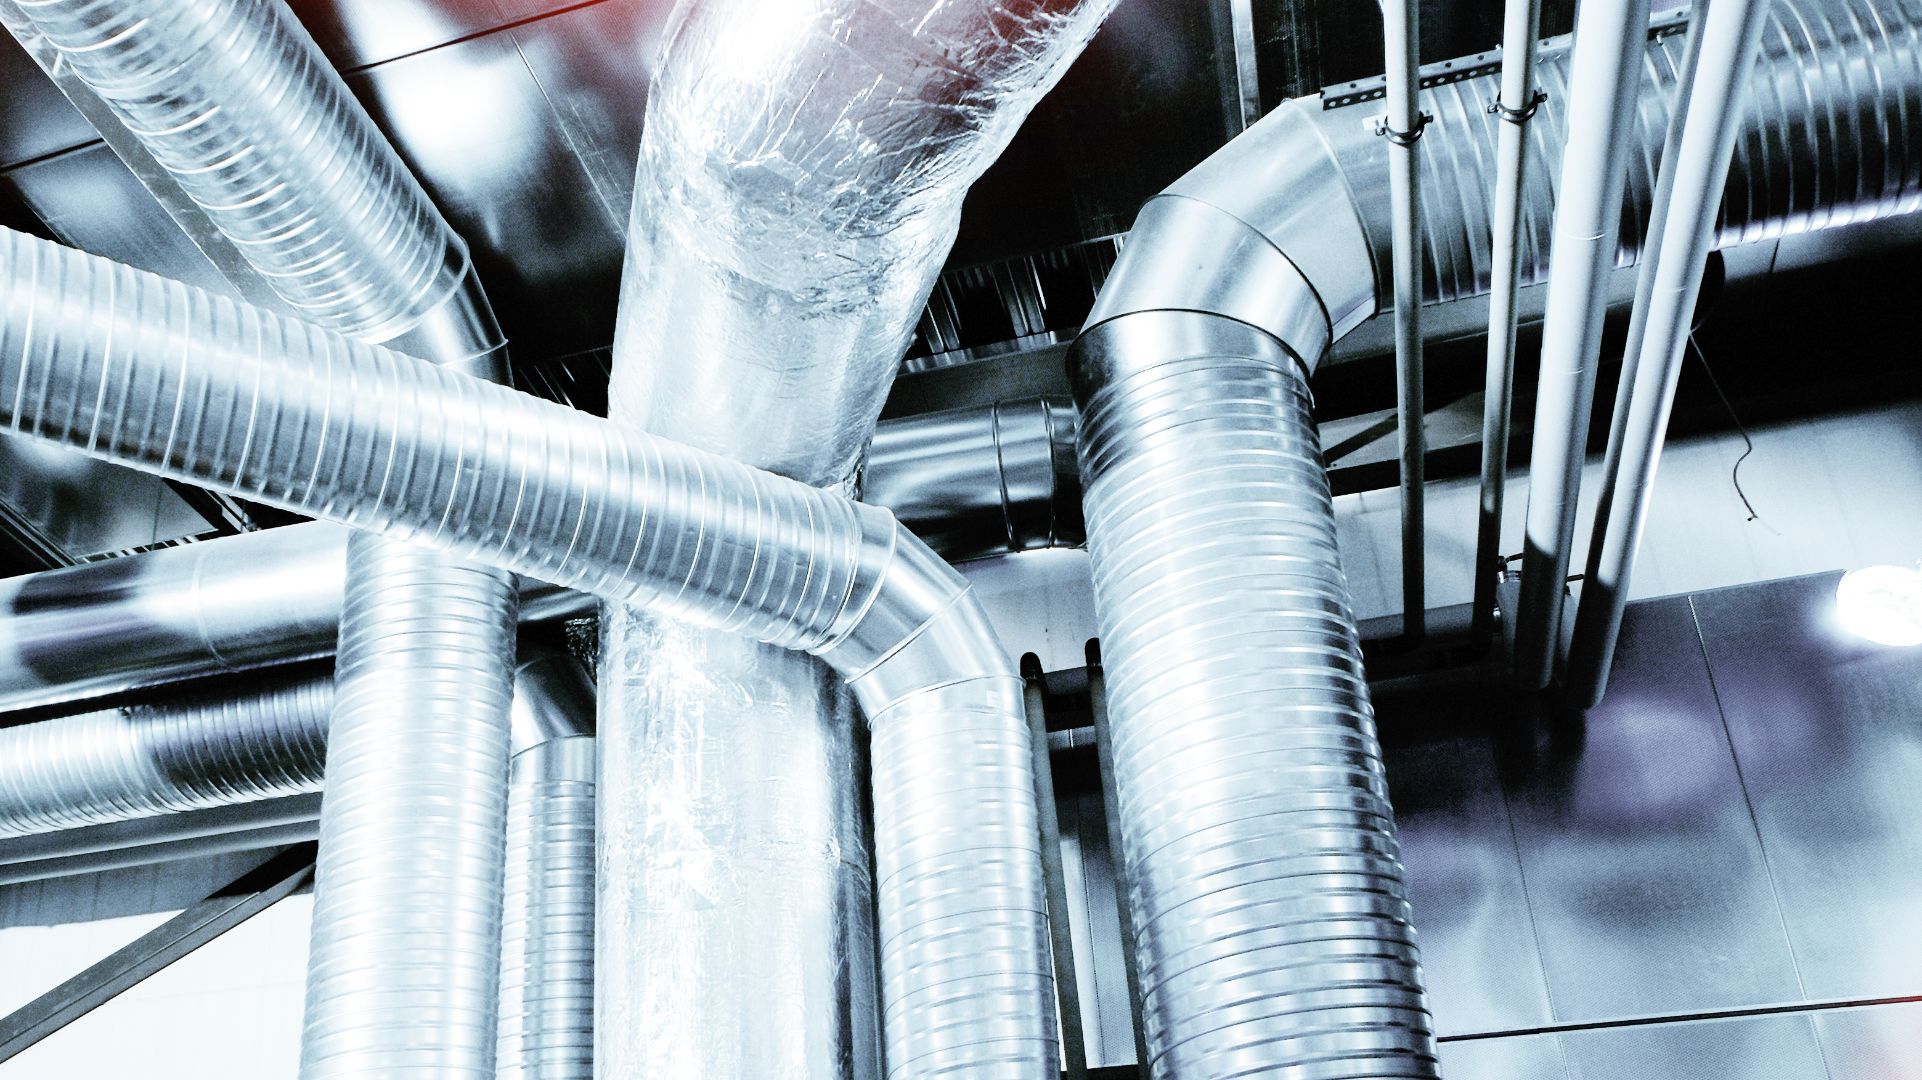 Smiths Group plc has acquired Heating & Cooling Products